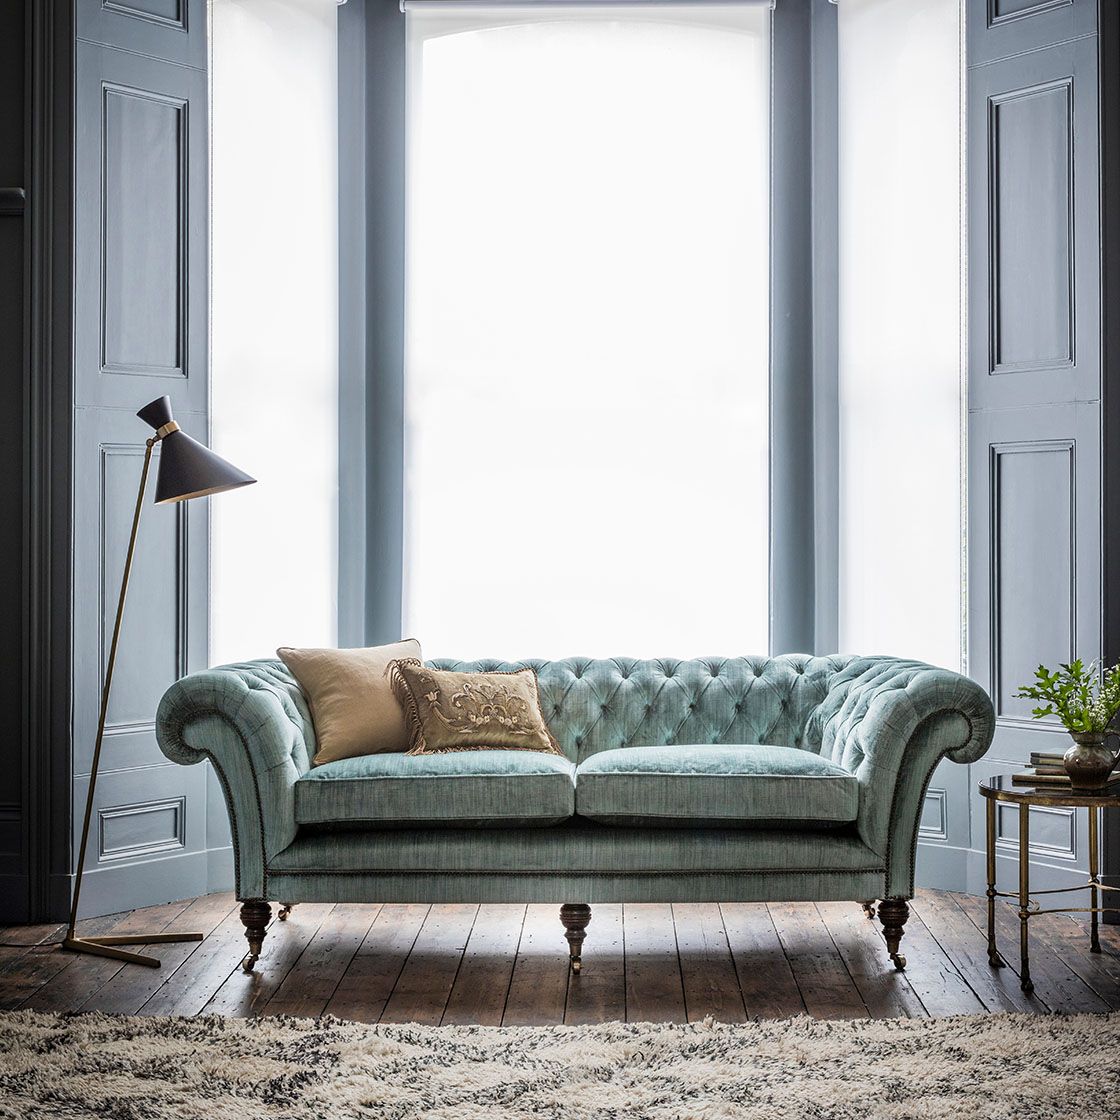 Grenville 3 seater sofa in Como silk velvet - Teal with Thalia cushion - Beaumont & Fletcher